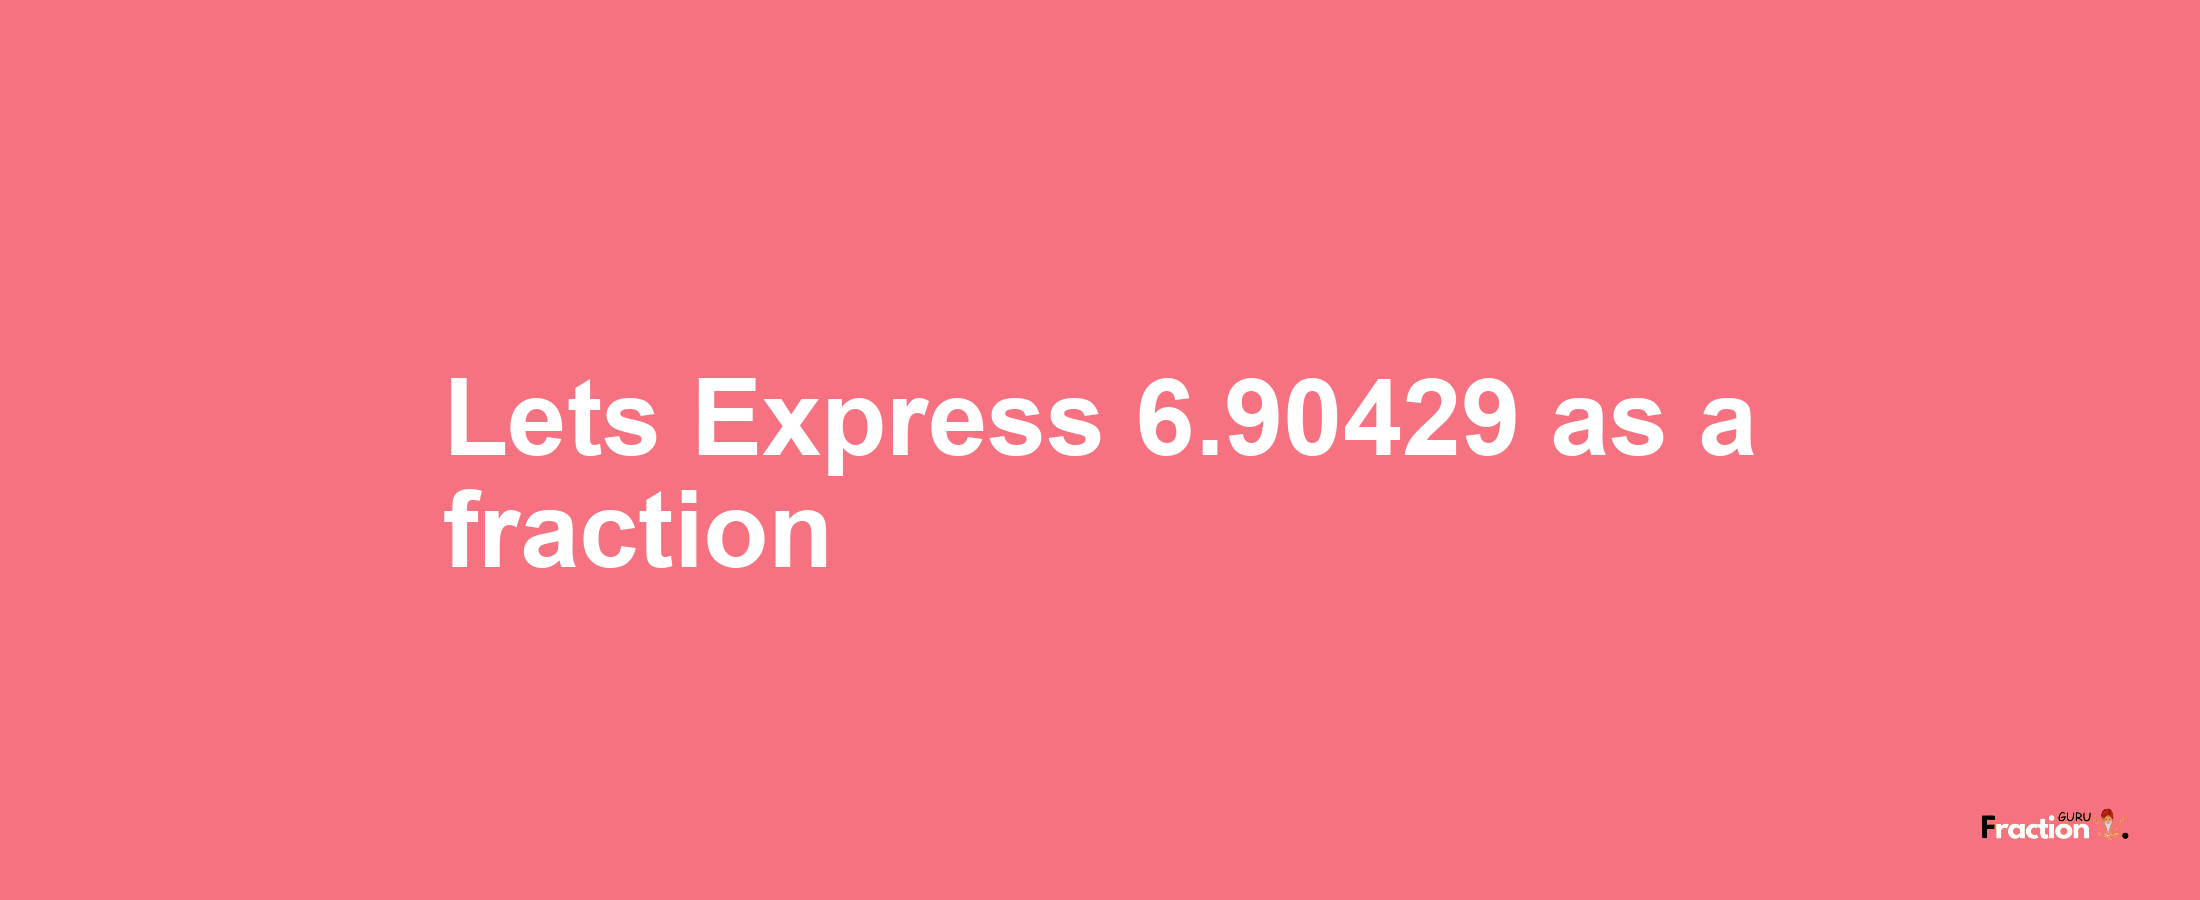 Lets Express 6.90429 as afraction